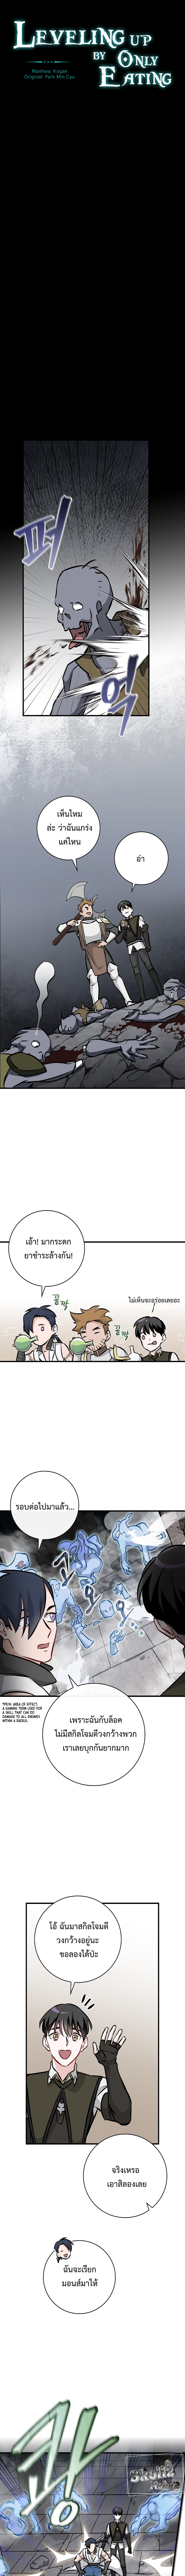 Leveling Up by Only Eating! ตอนที่ 76 (3)